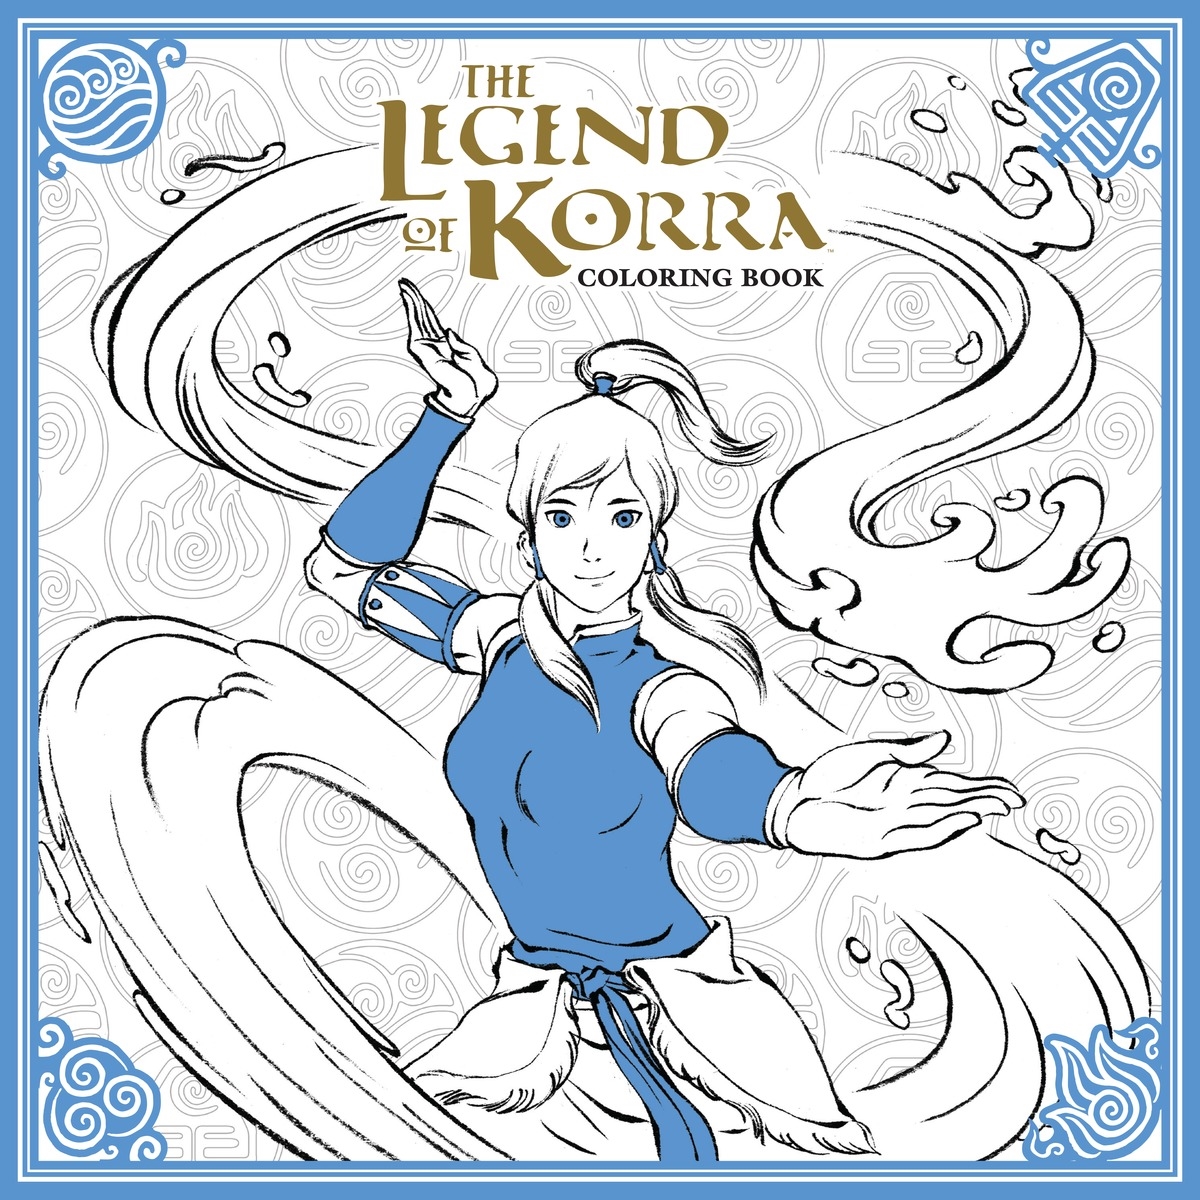 Download The Legend Of Korra Coloring Book By Nickelodeon Penguin Books Australia